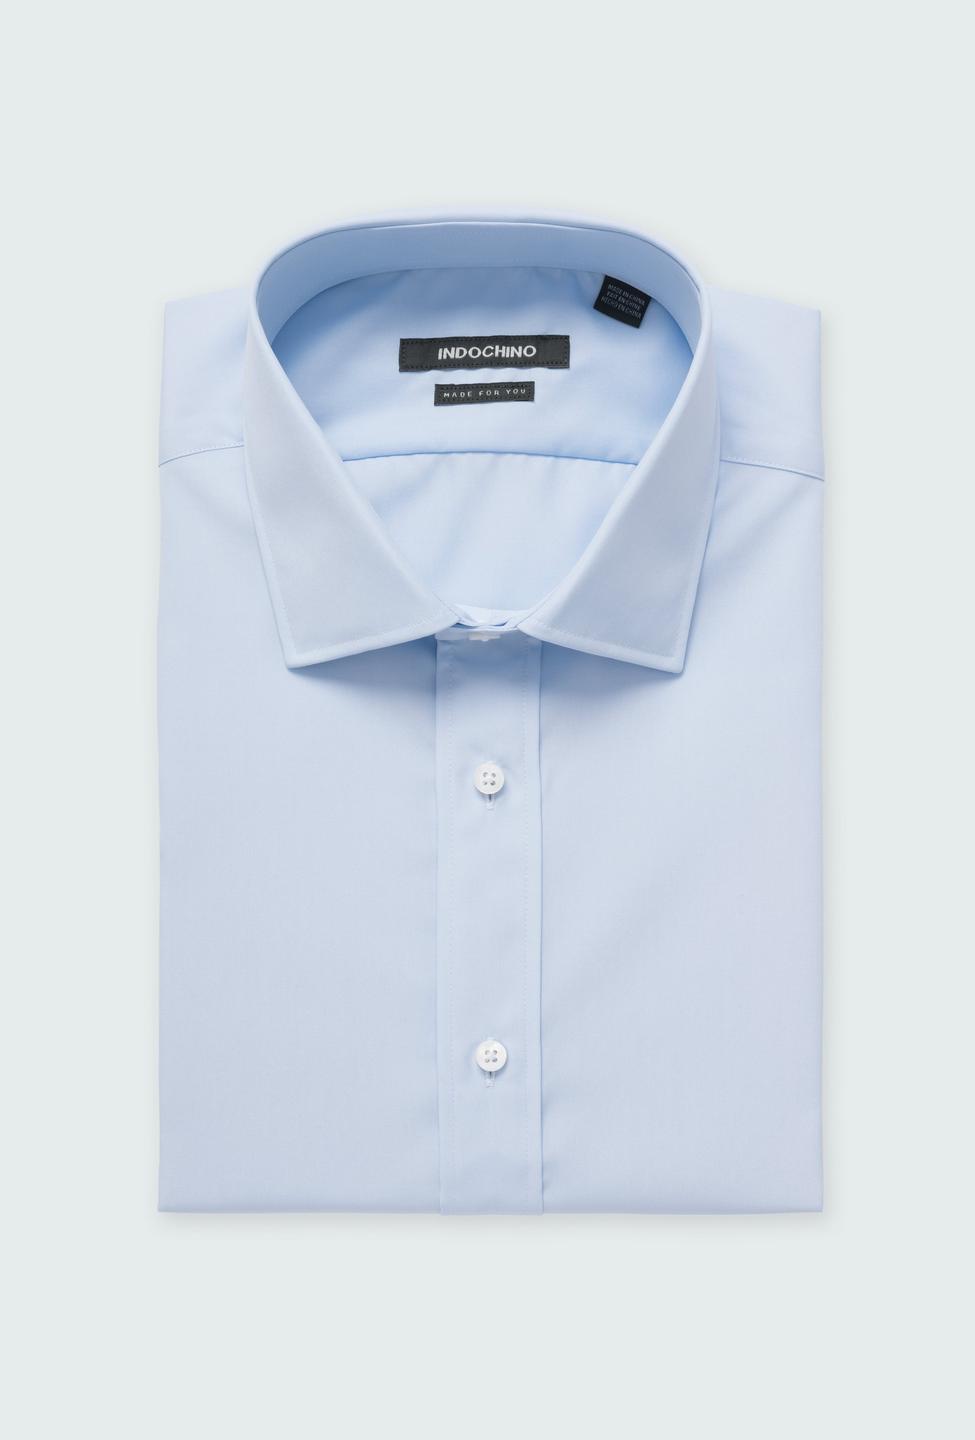 Blue shirt - Helston Solid Design from Premium Indochino Collection